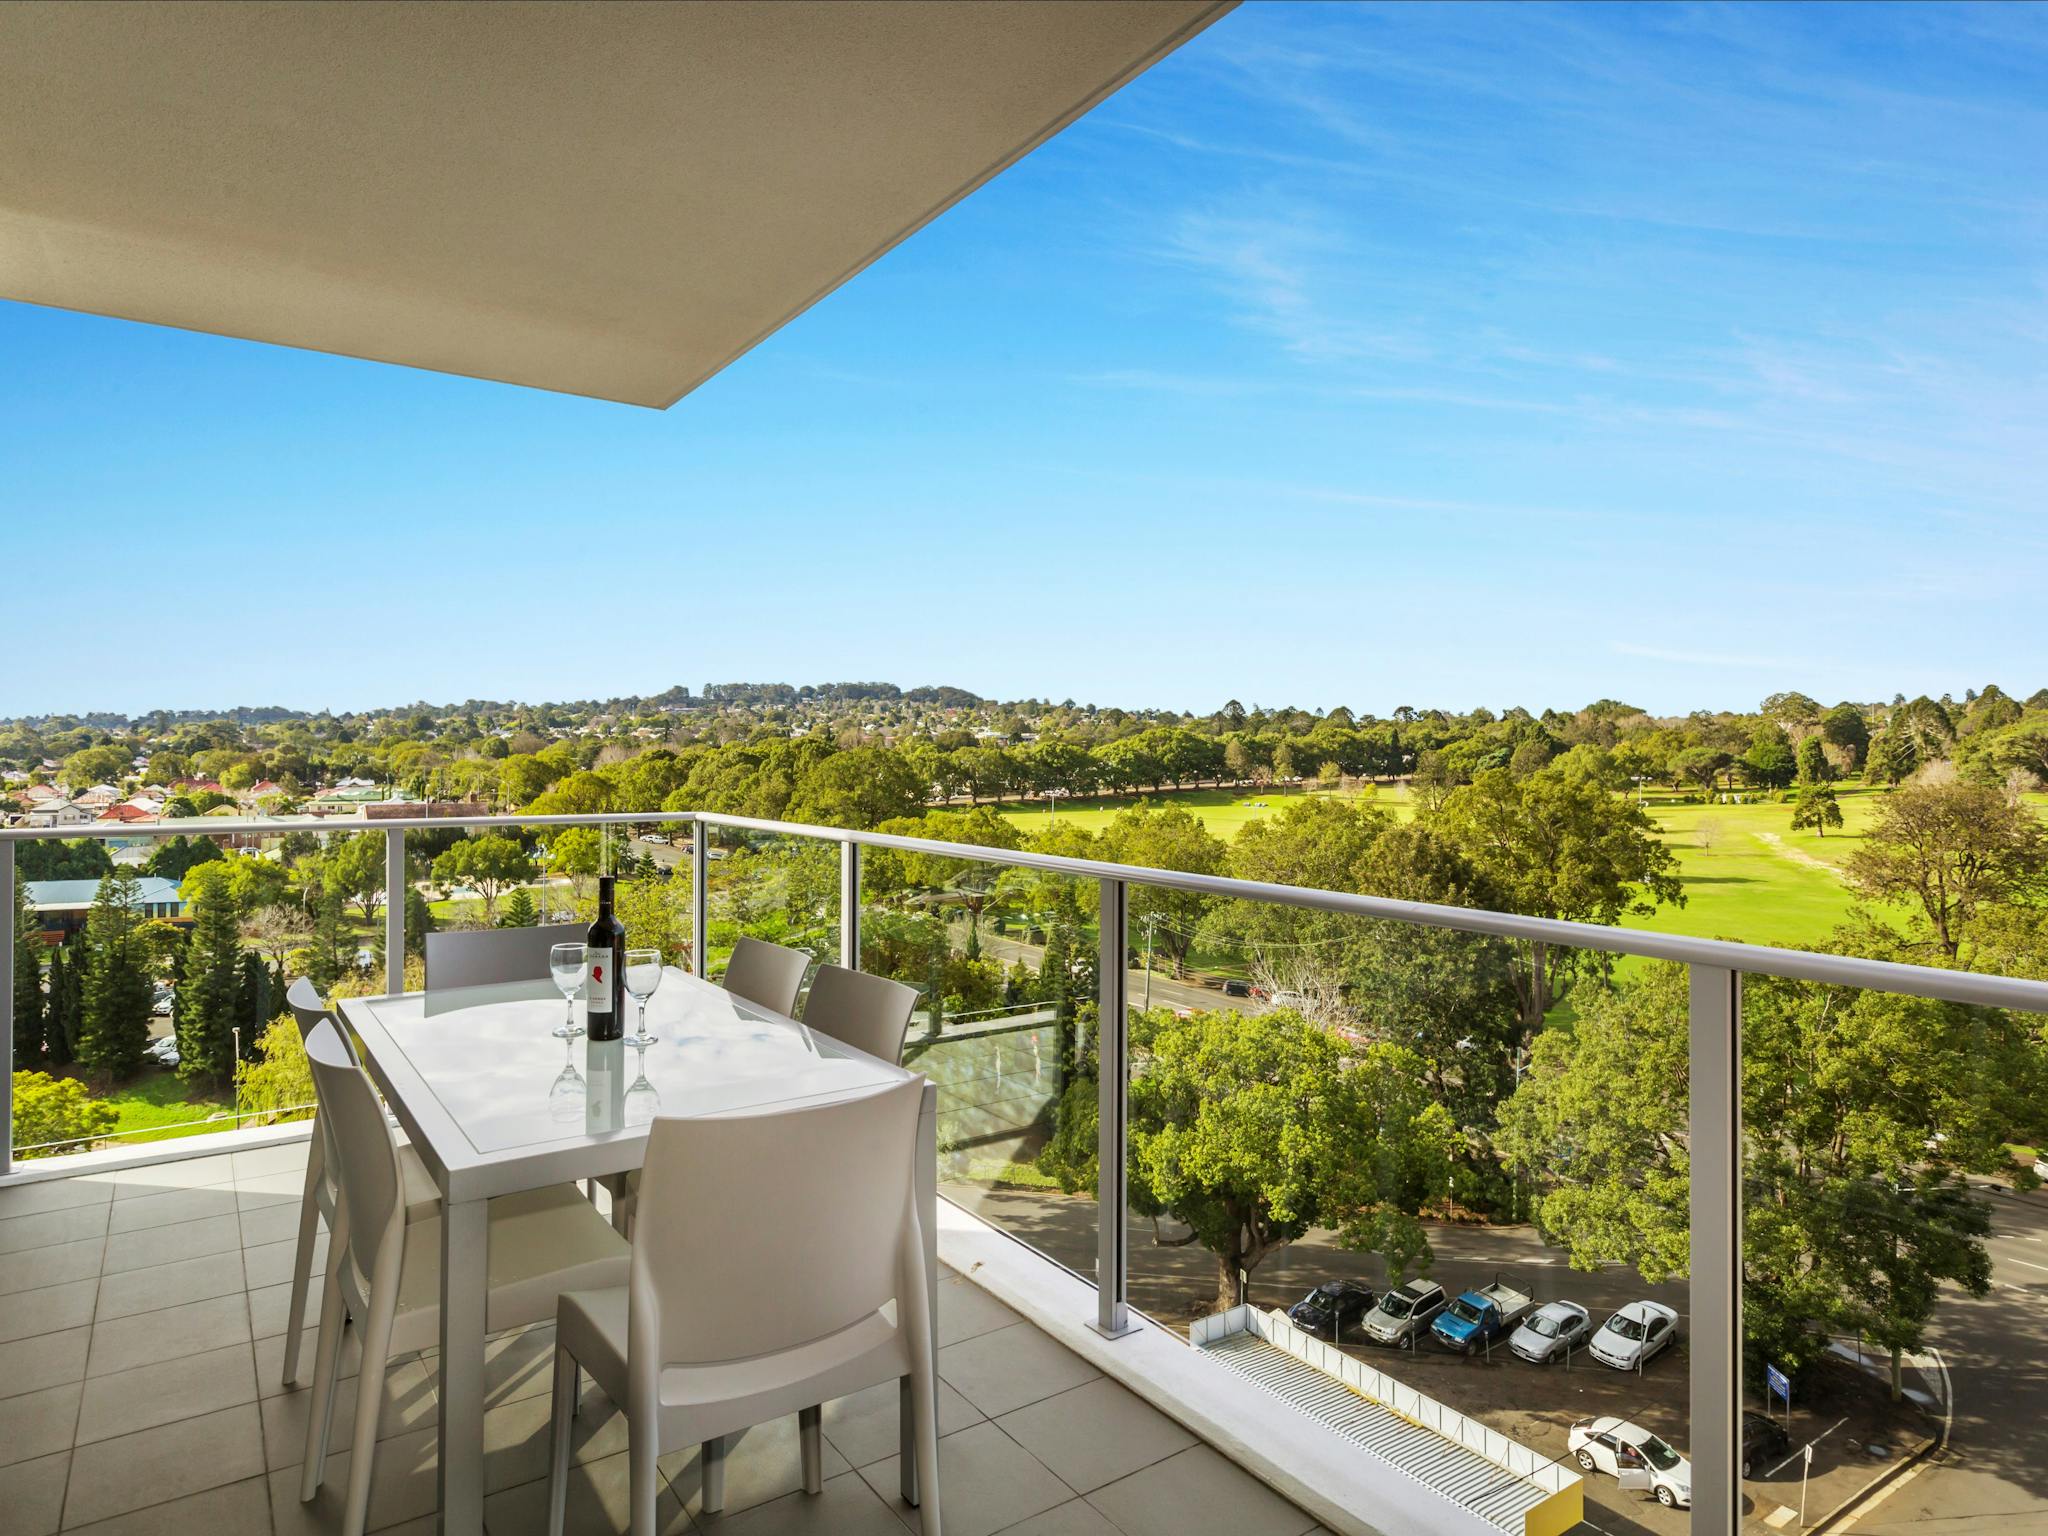 Quest Toowoomba Serviced Apartments